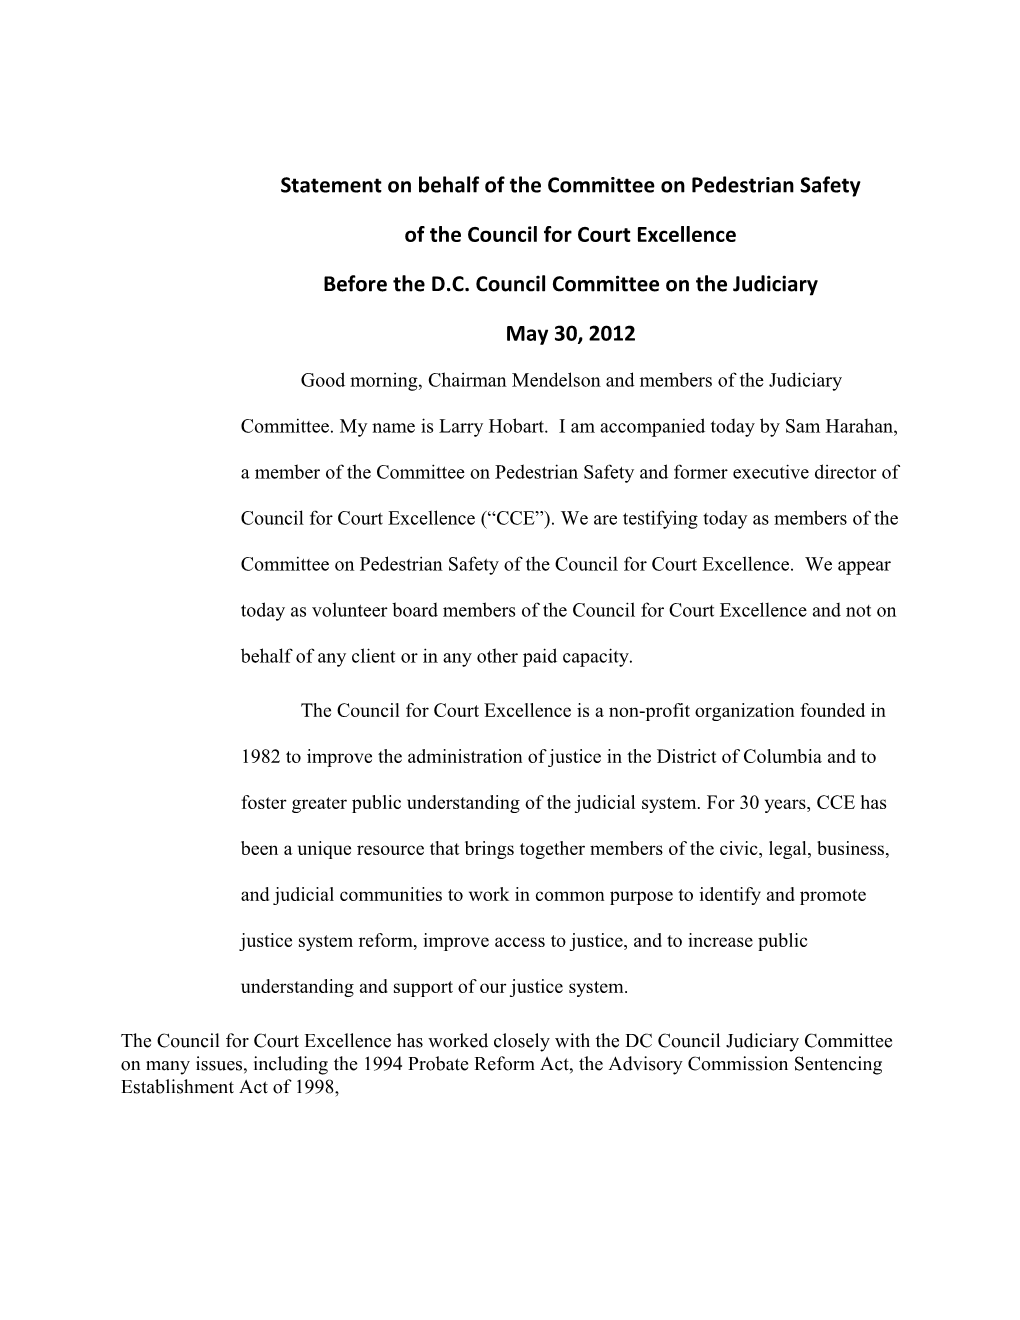 Statement on Behalf of the Committee on Pedestrian Safety